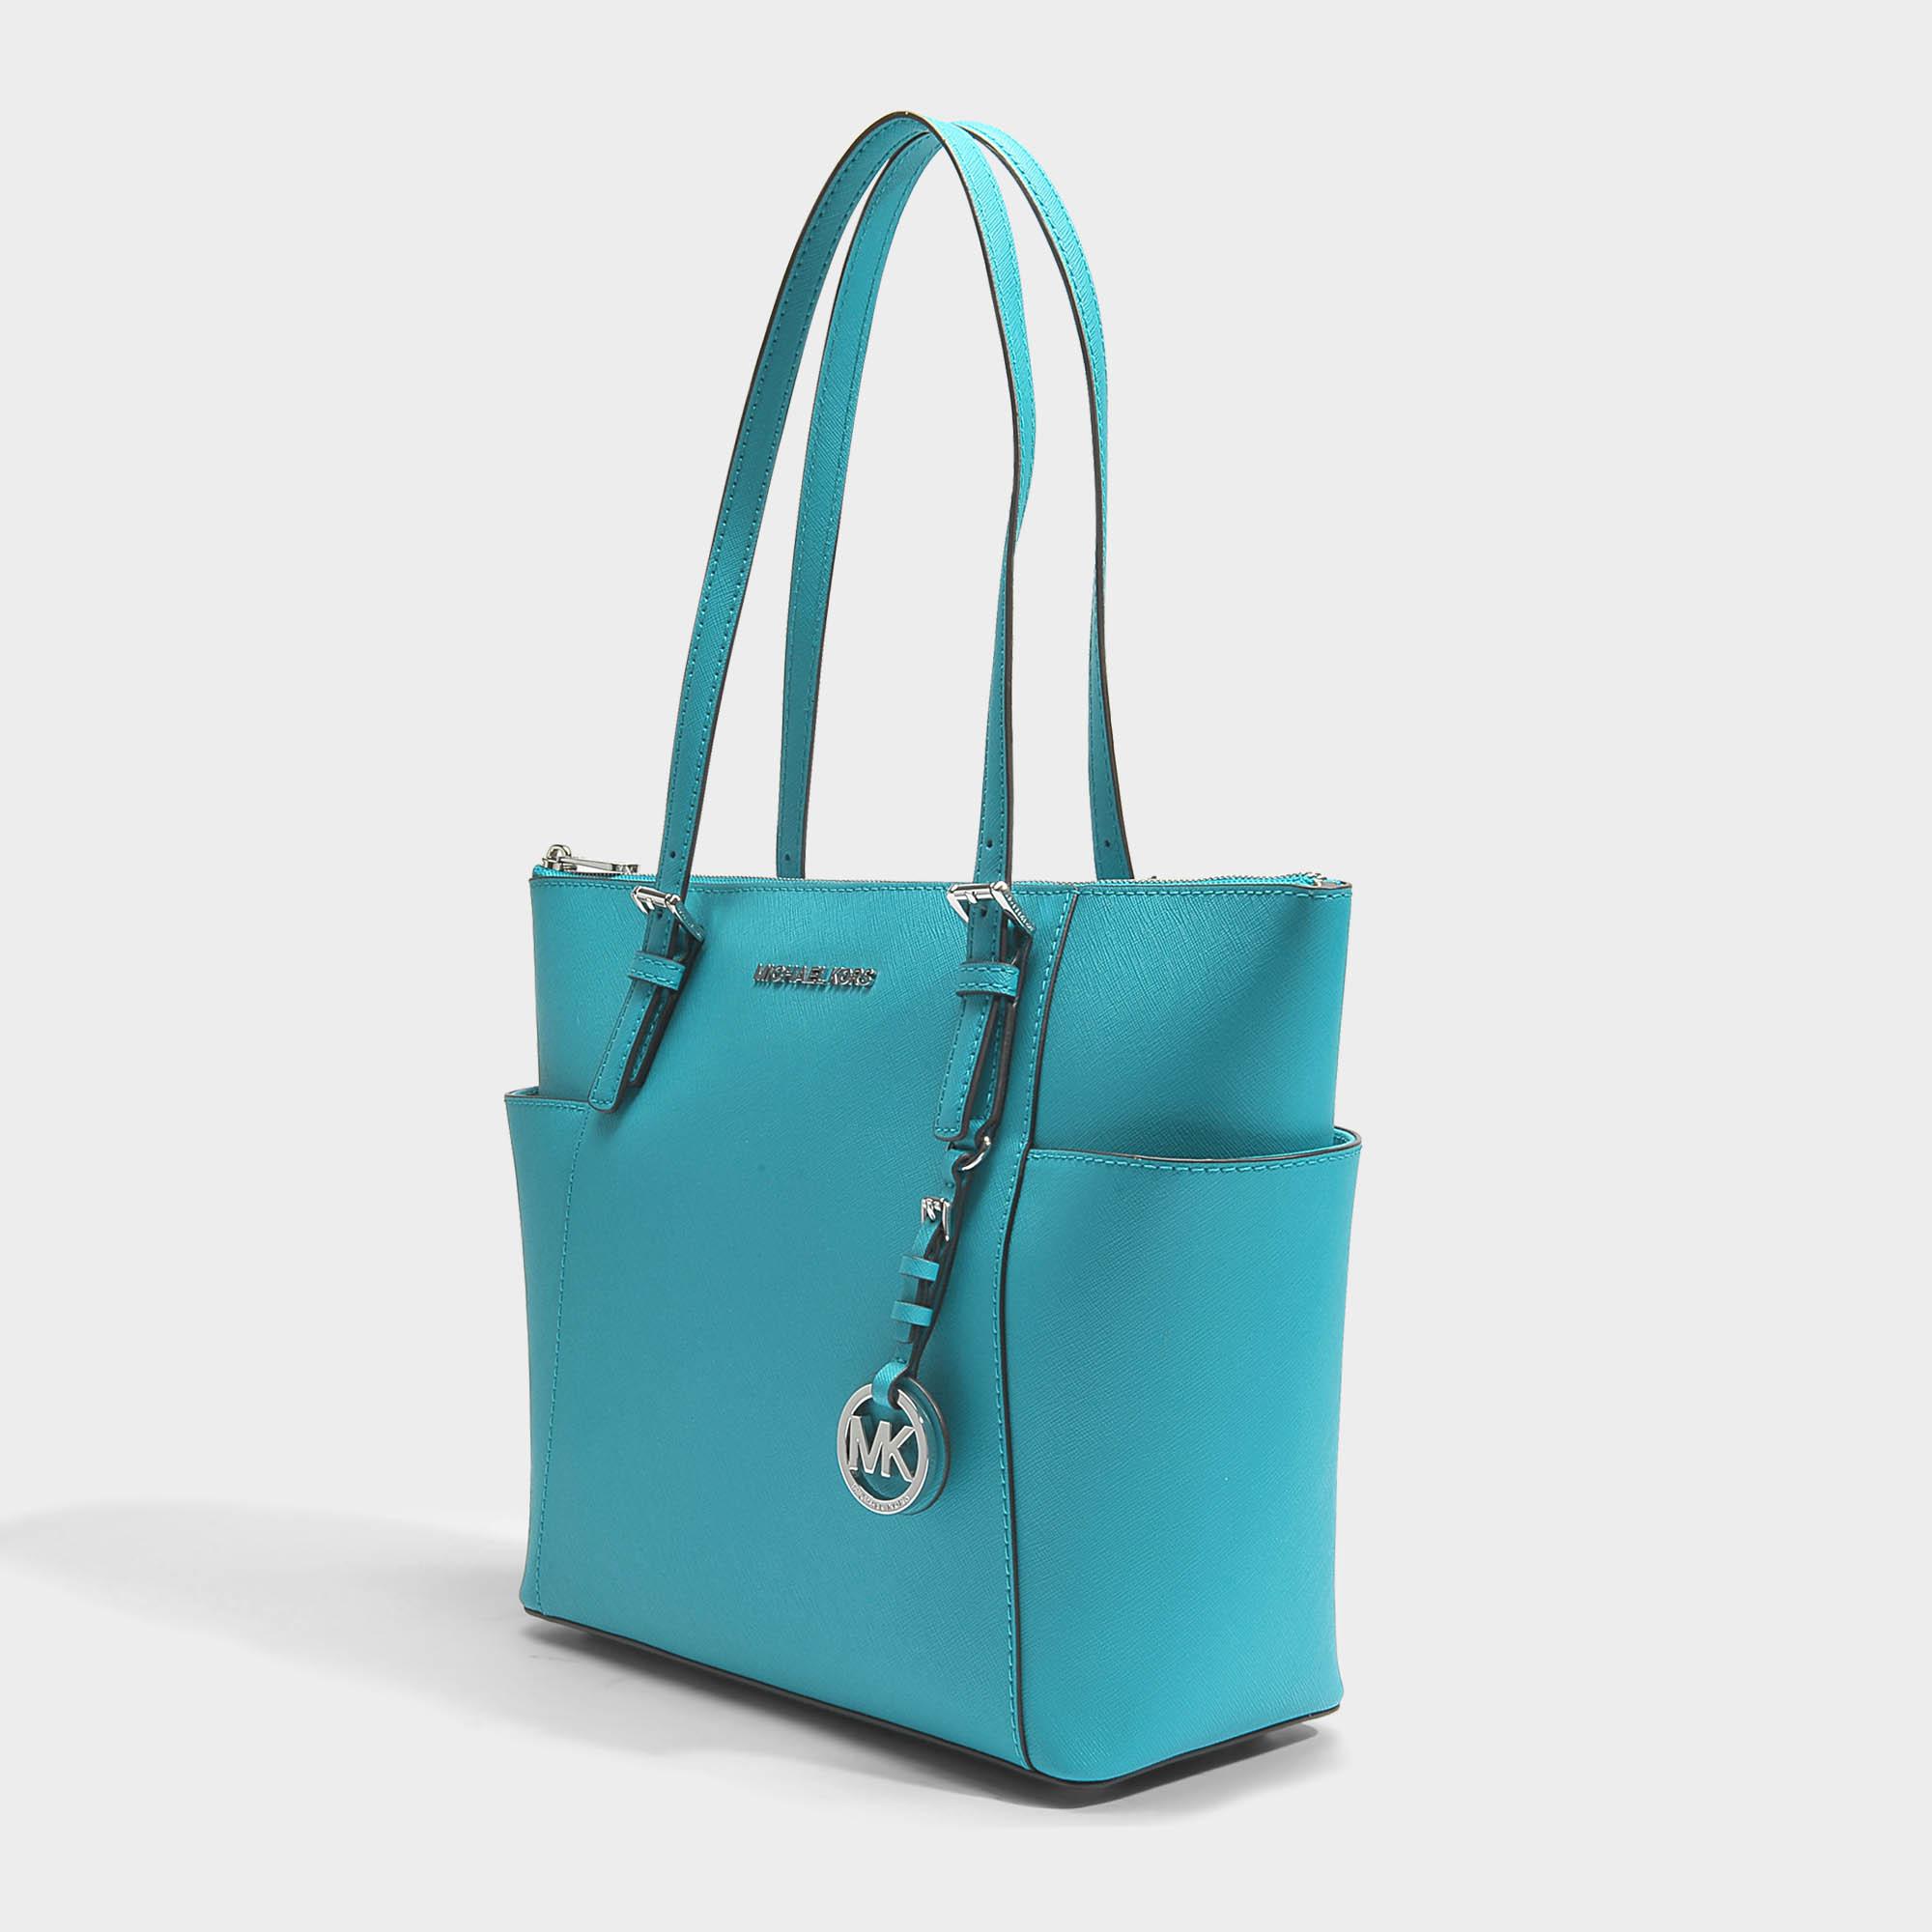 Jet Set Item East-west Top Zip Tote Bag In Turquoise Blue Saffiano Leather